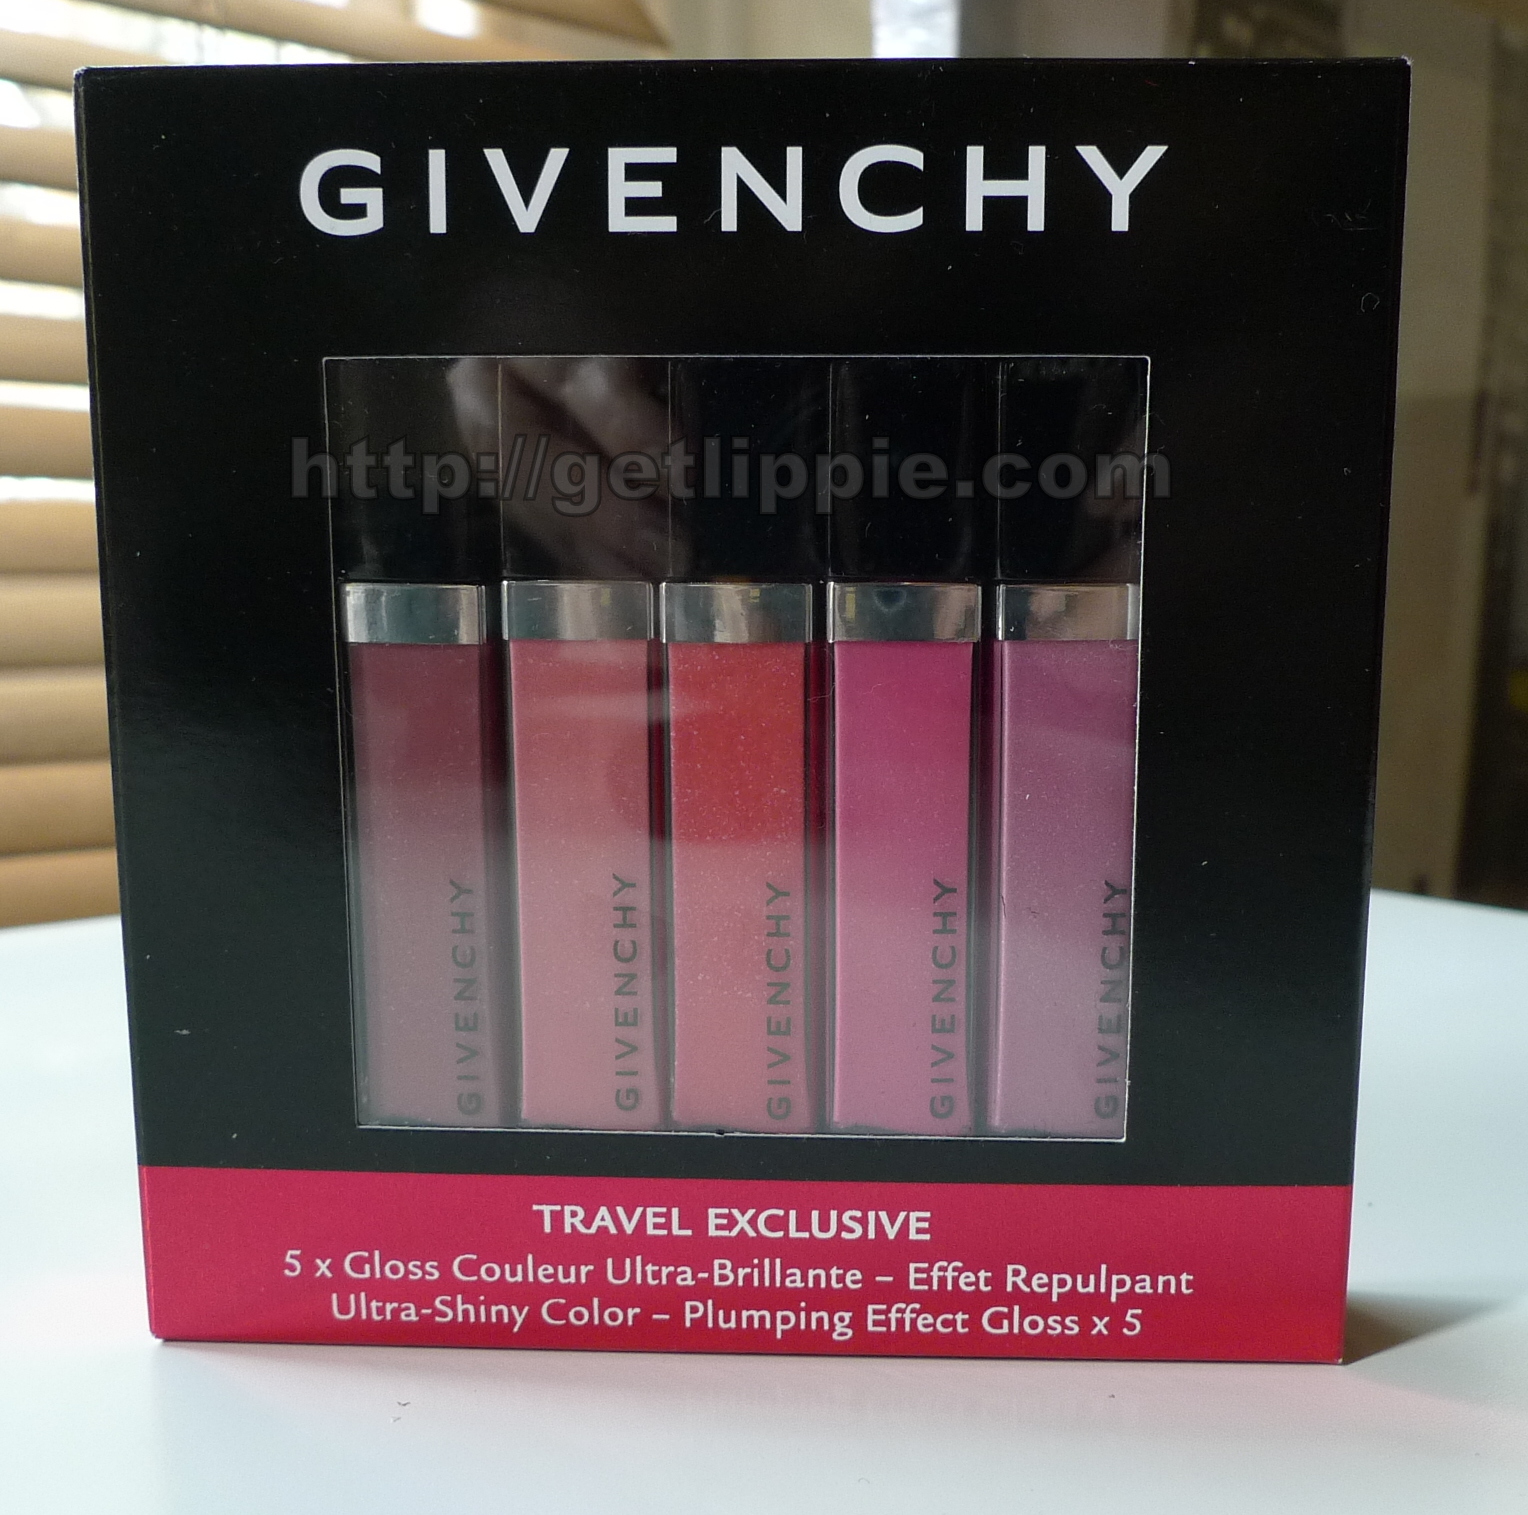 givenchy l'interdit travel exclusive